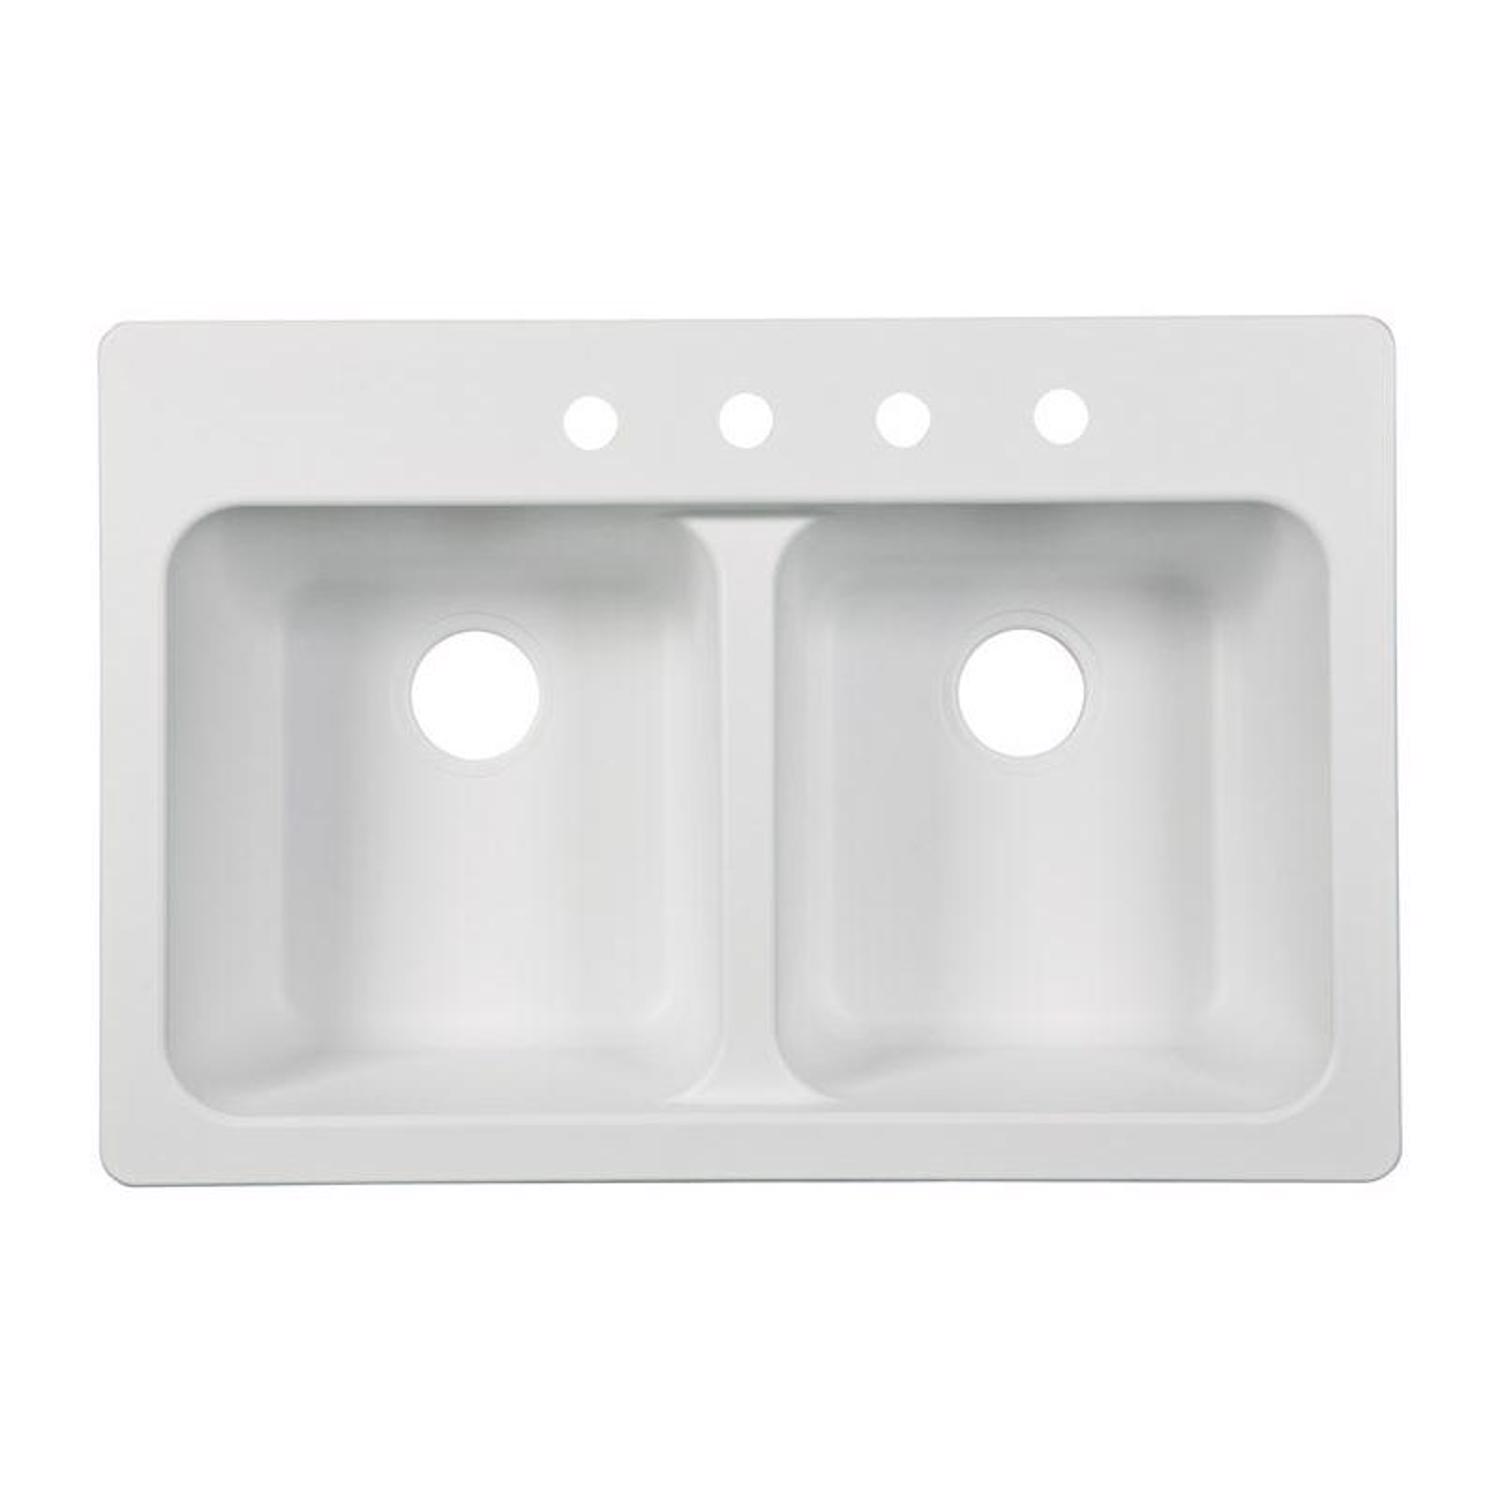 Photos - Kitchen Sink Franke Tectonite Dual Mount 33 in. W X 22 in. L Double Bowl  W 